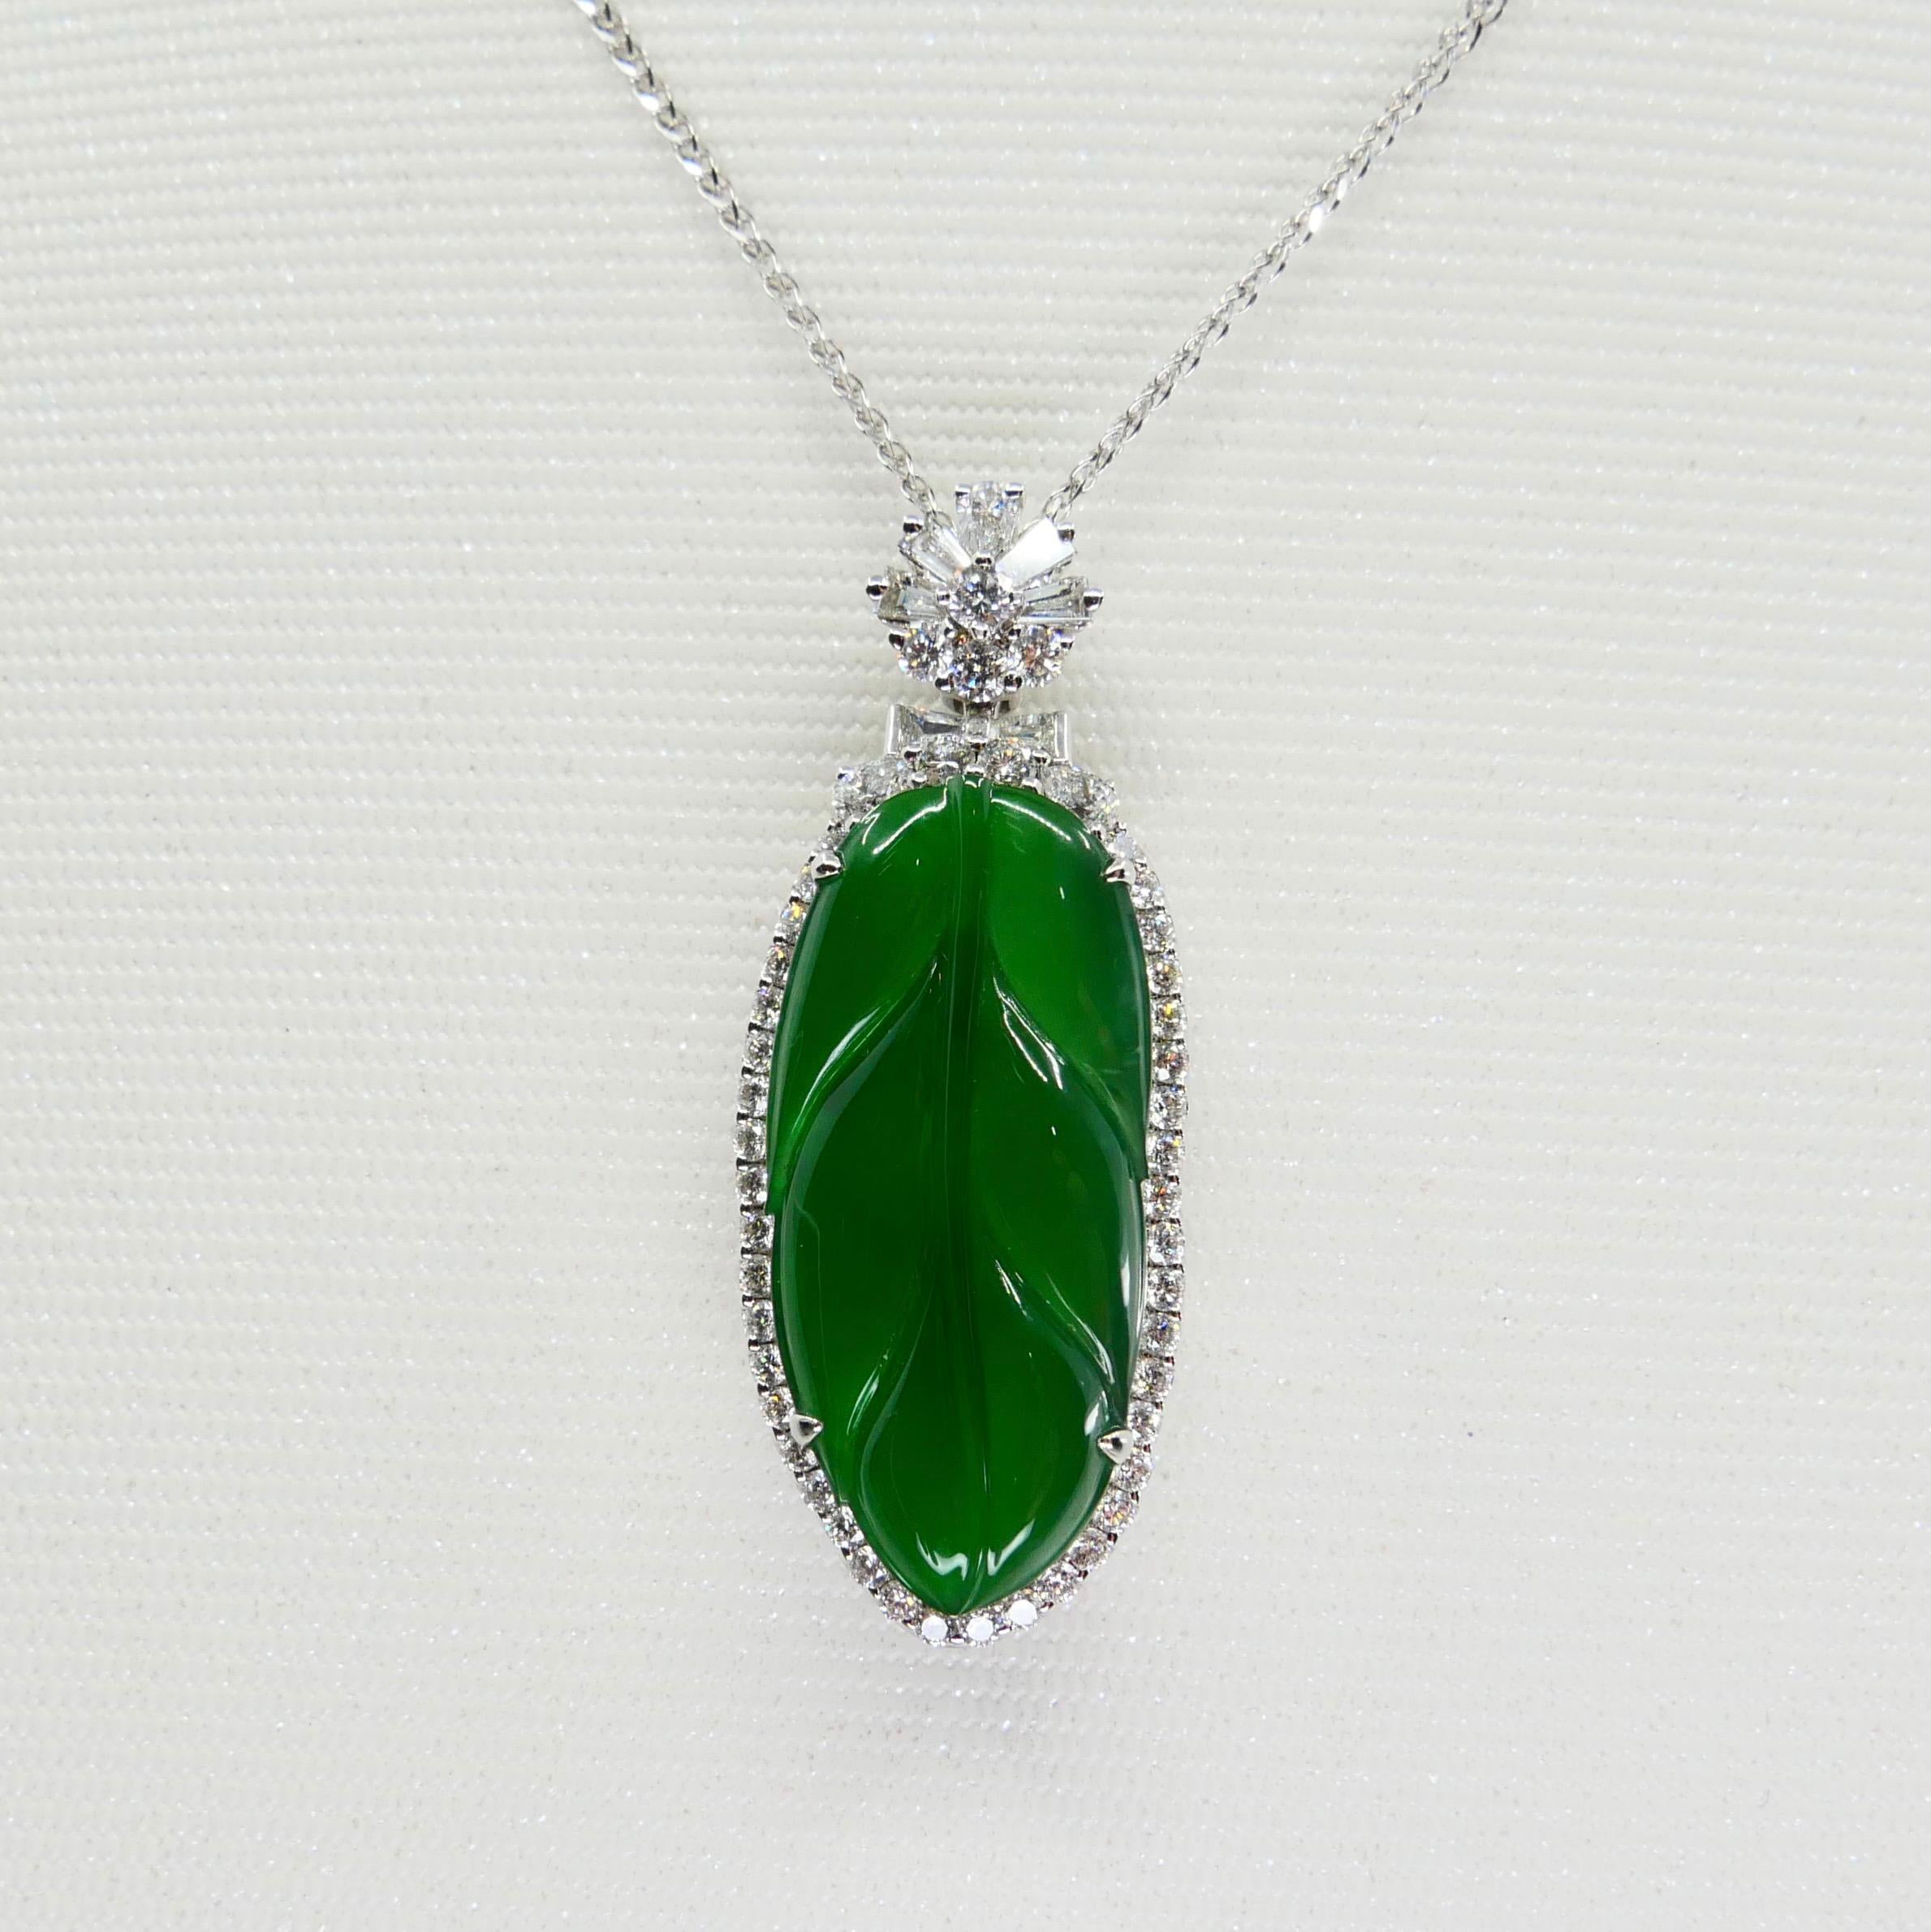 Rough Cut Important Certified Imperial Jadeite Jade & Diamond Pendant Necklace, Icy Jade For Sale